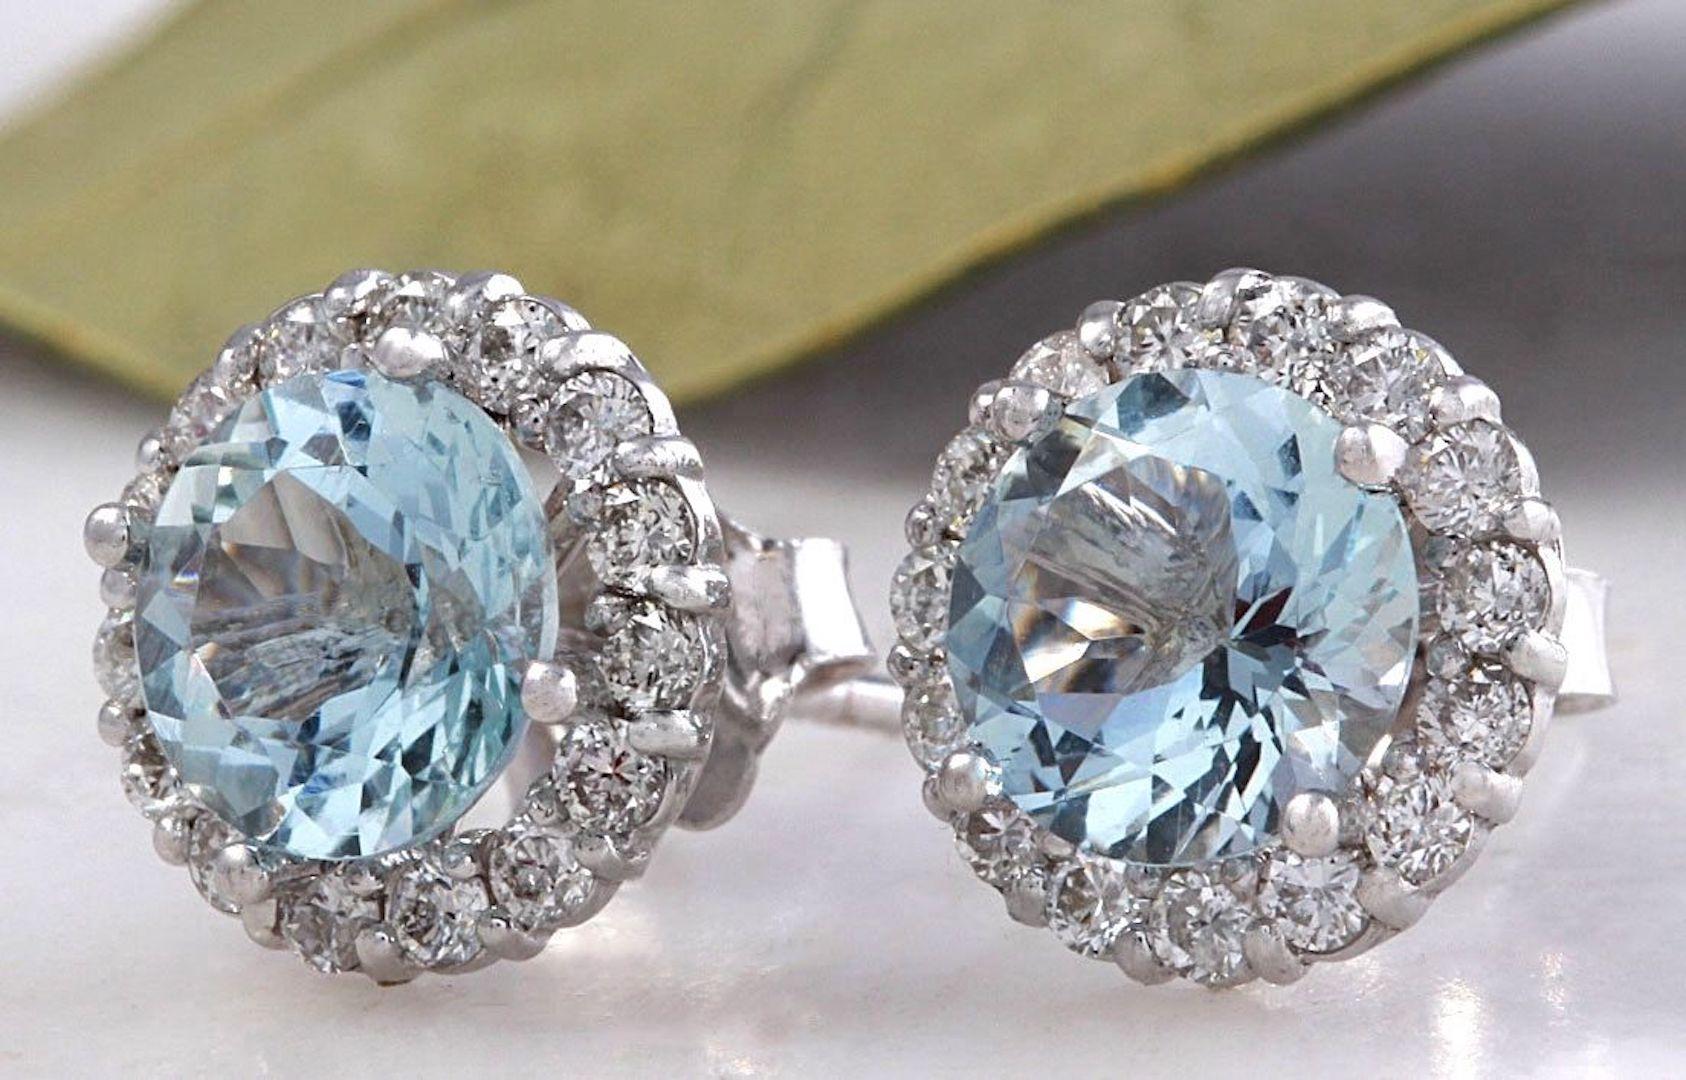 Exquisite 3.05 Carats Natural Aquamarine and Diamond 14K Solid White Gold Stud Earrings

Amazing looking piece!

Total Natural Round Cut White Diamonds Weight: .60 Carats (color G-H / Clarity SI1-SI2)

Total Natural Round Cut Aquamarines Weight: